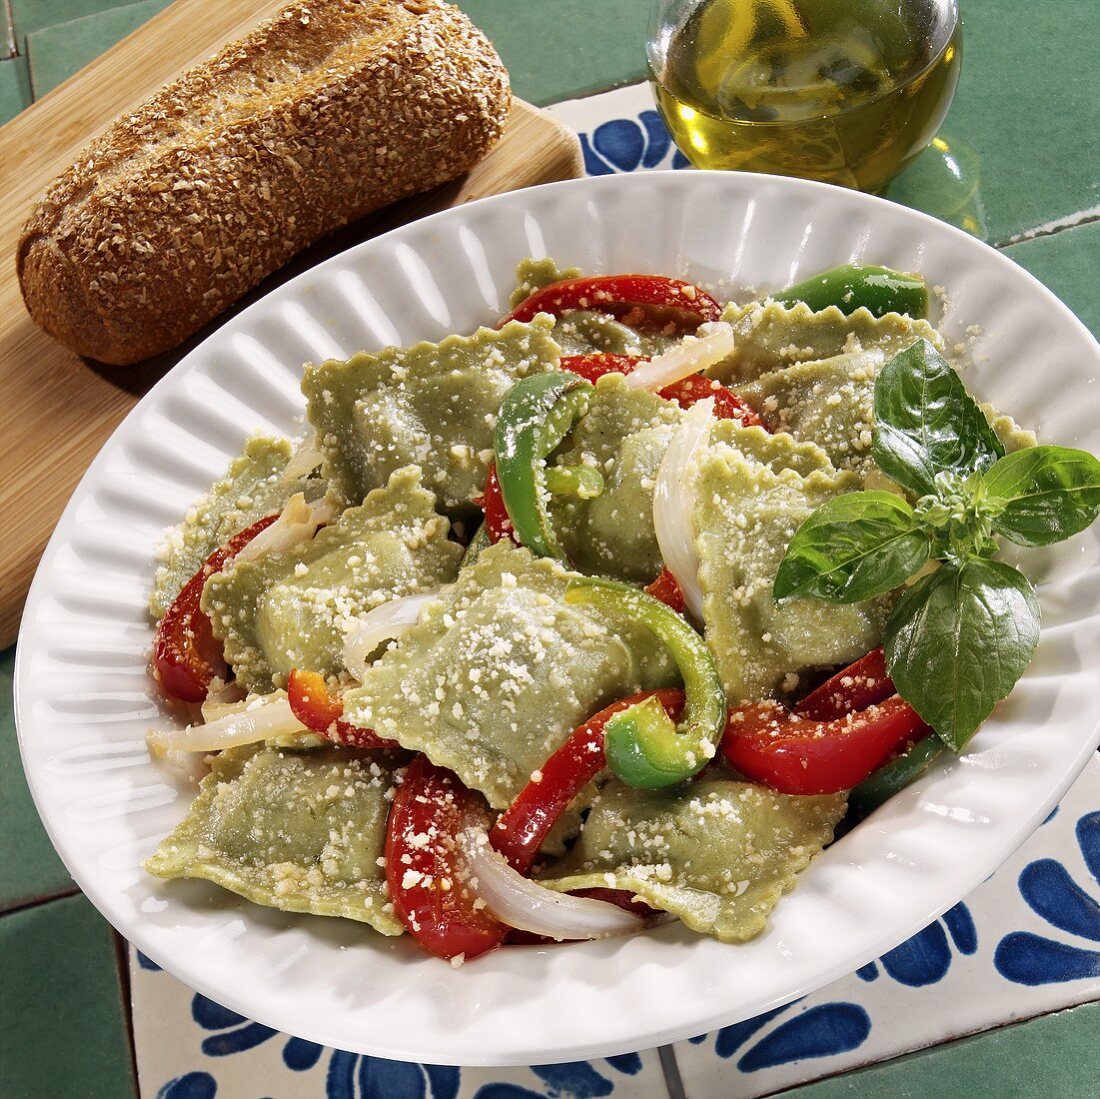 Spinach ravioli with peppers, onions and cheese